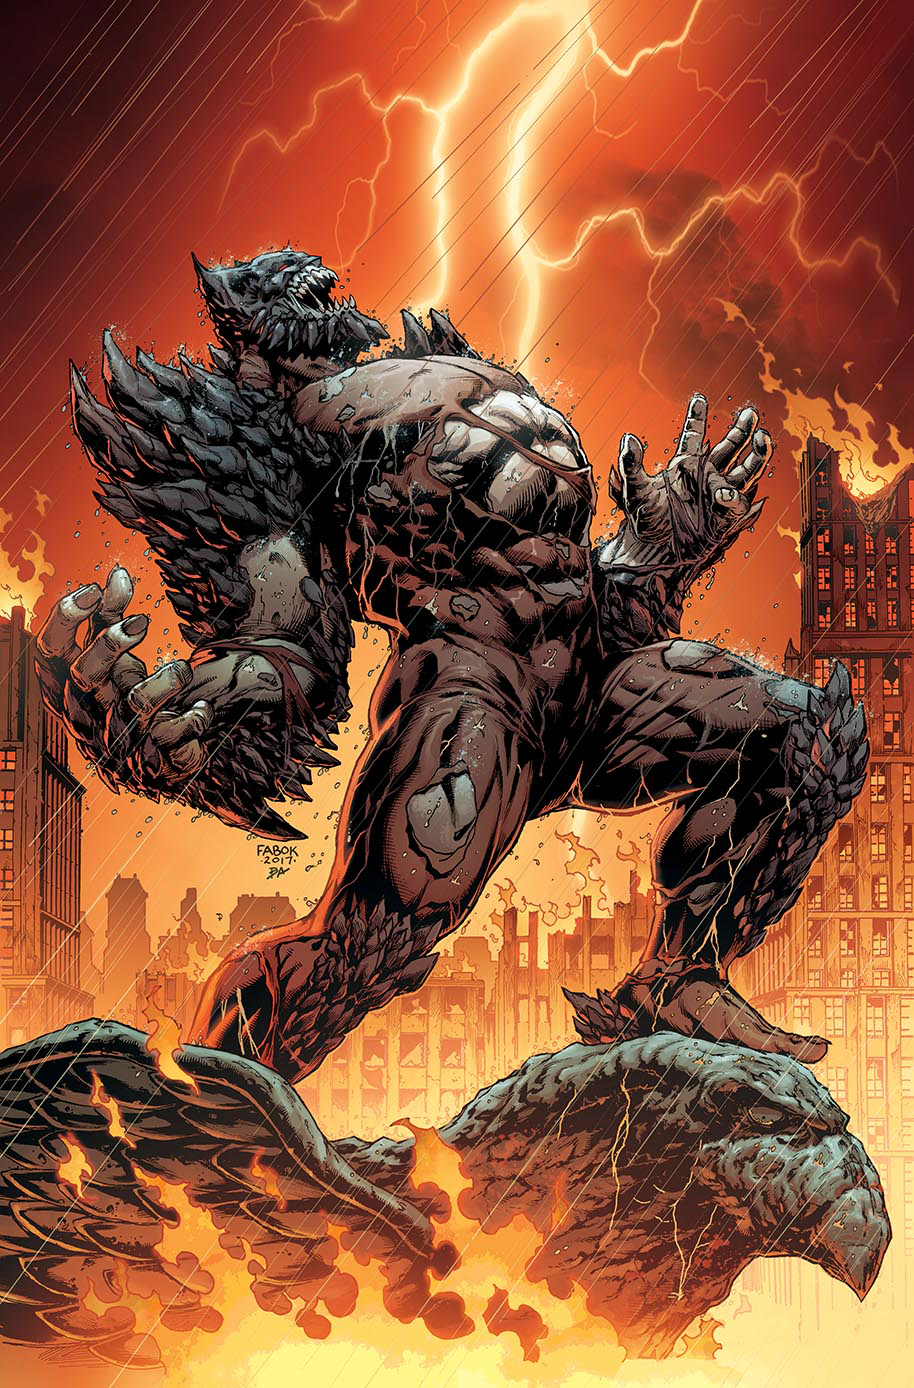 DC releases first look at 'Batman: The Devastator' #1 cover by Jason Fabok and Brad Anderson